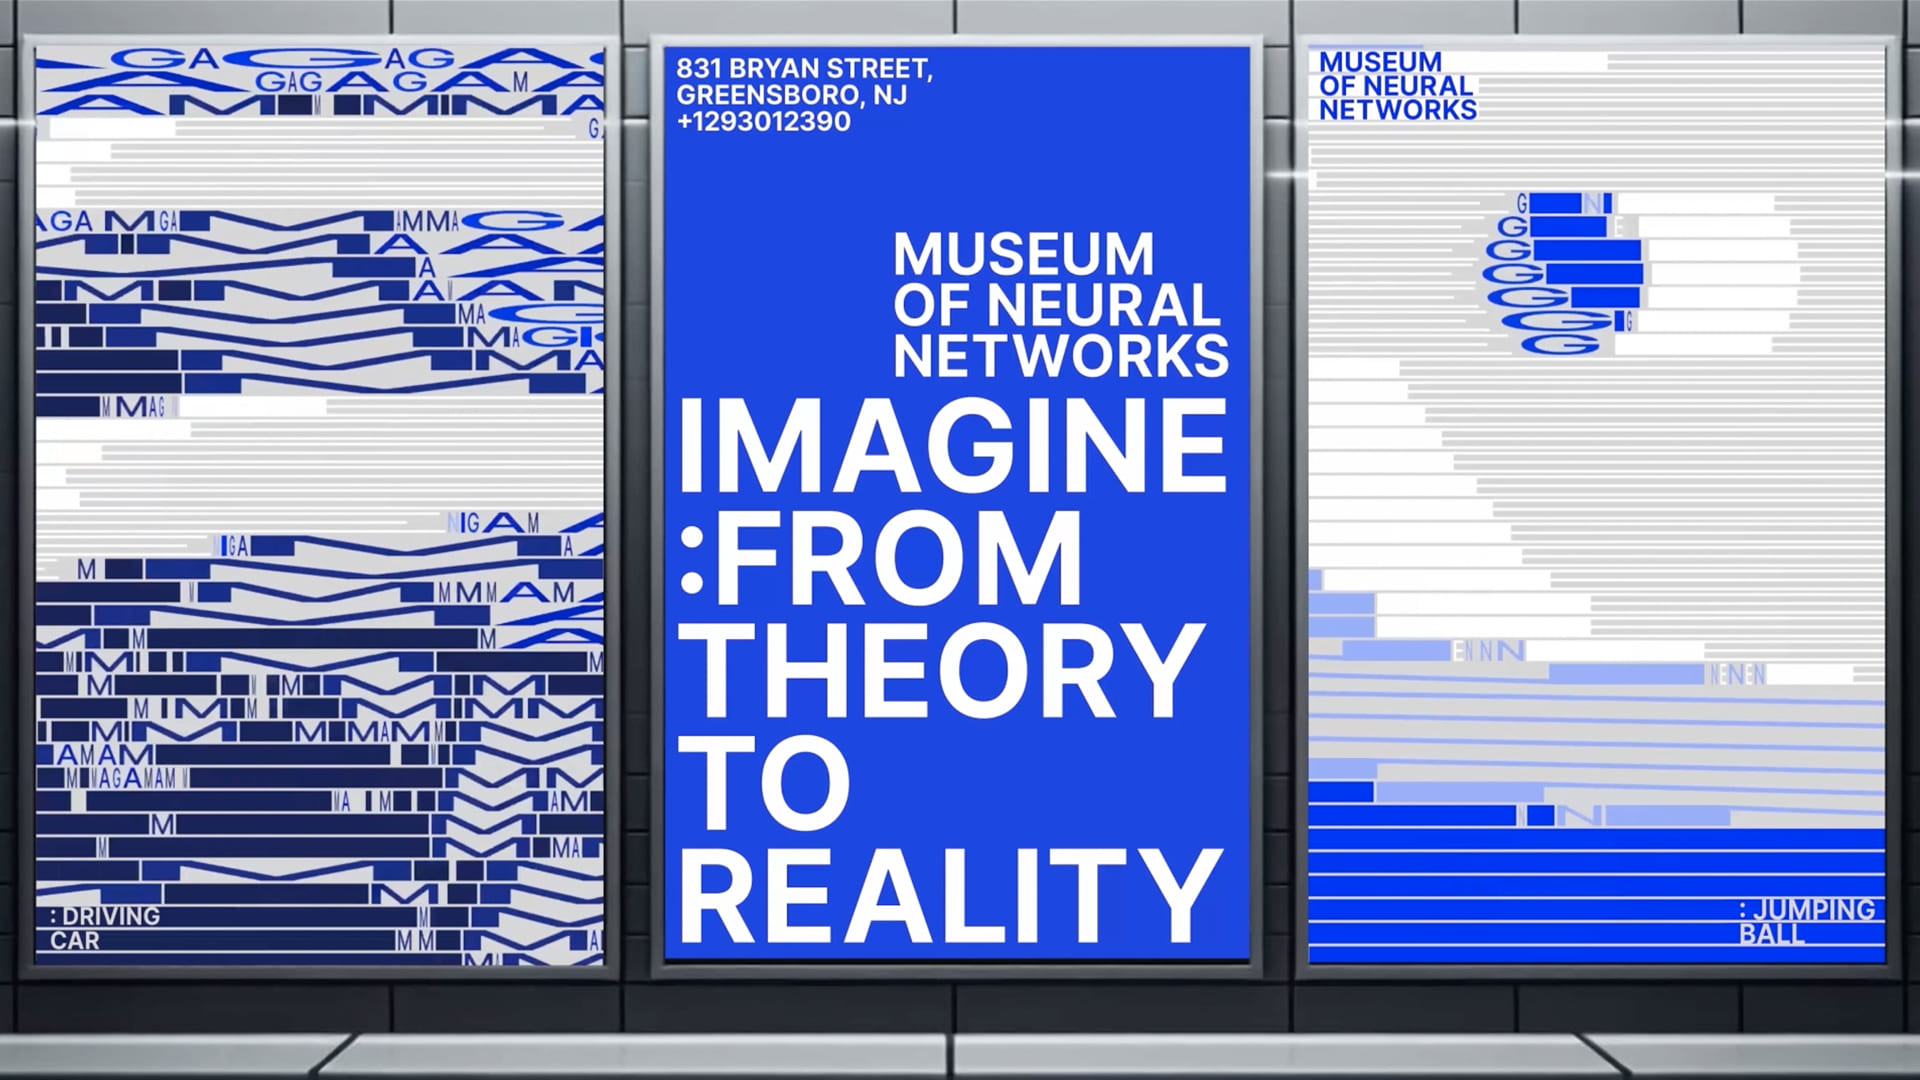 Identity Concept for Museum of Neural Networks by Student Yanina Kuznetsova